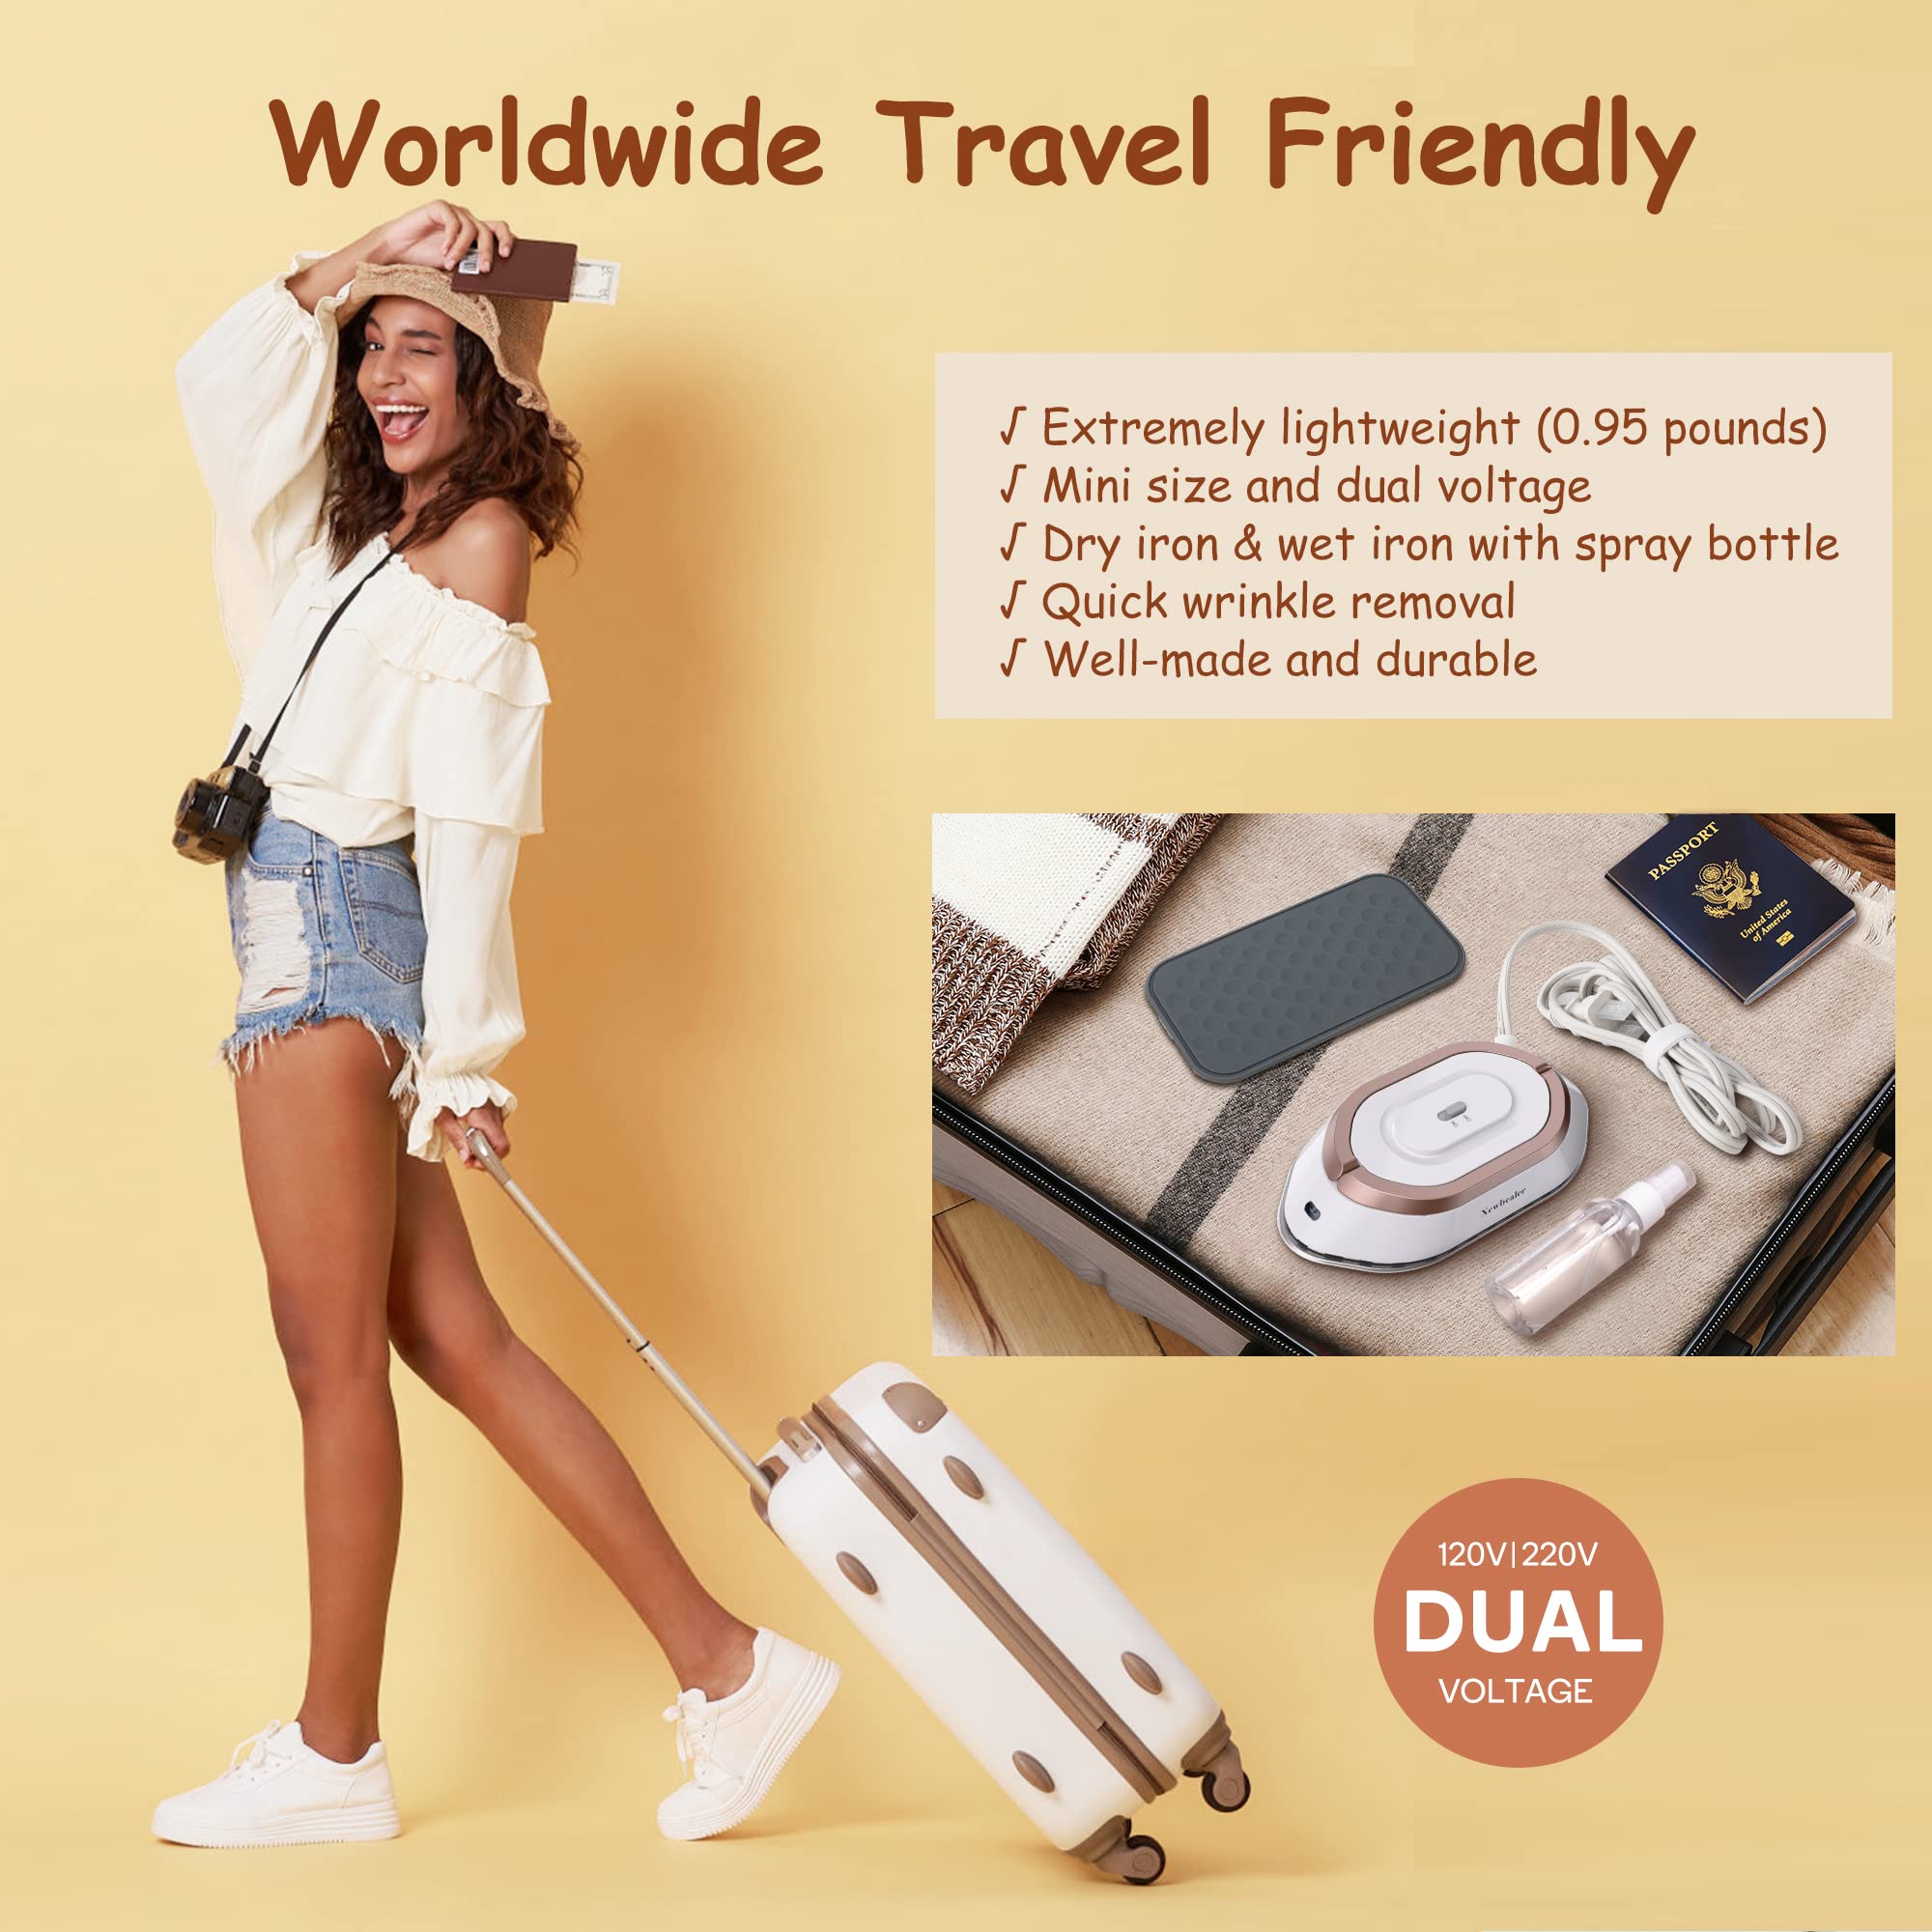 Newbealer Travel Iron bundle with Handheld Steamer for Clothes, Dry Iron and Powerful Steamer, Portable for Travel and Home Use